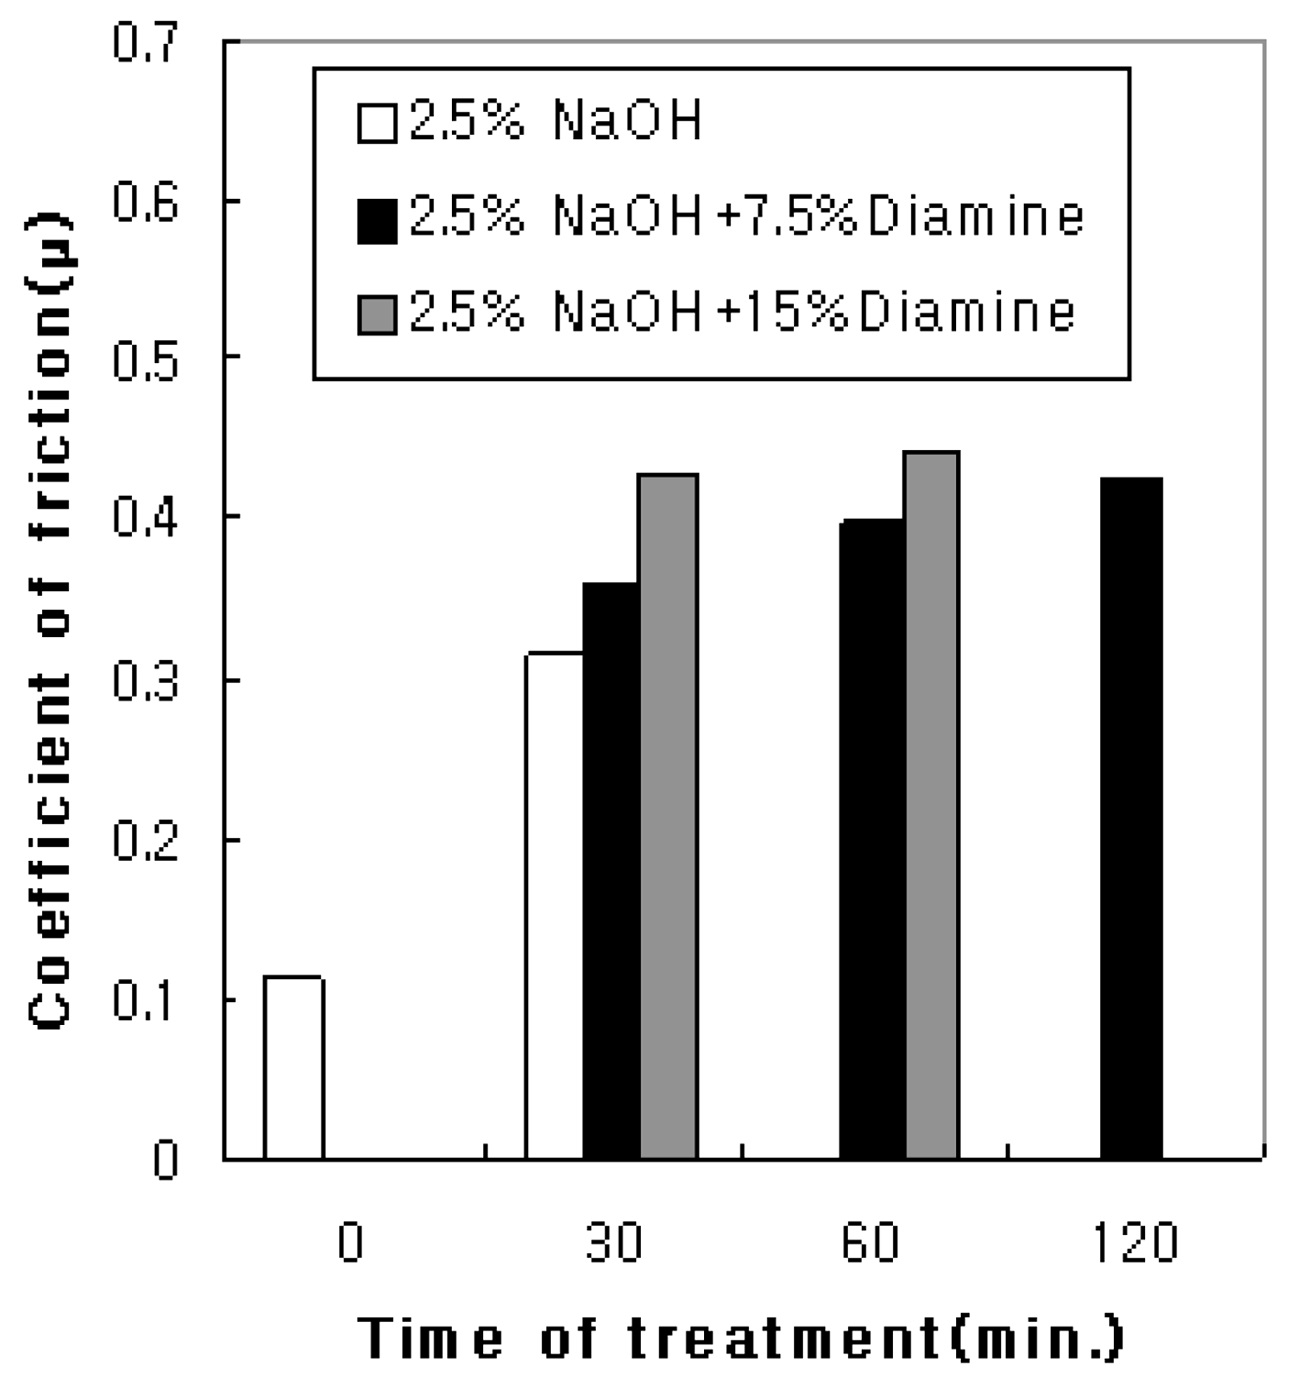 The coefficient friction of PET film treated with NaOH or NaOH+ethylene diamine.